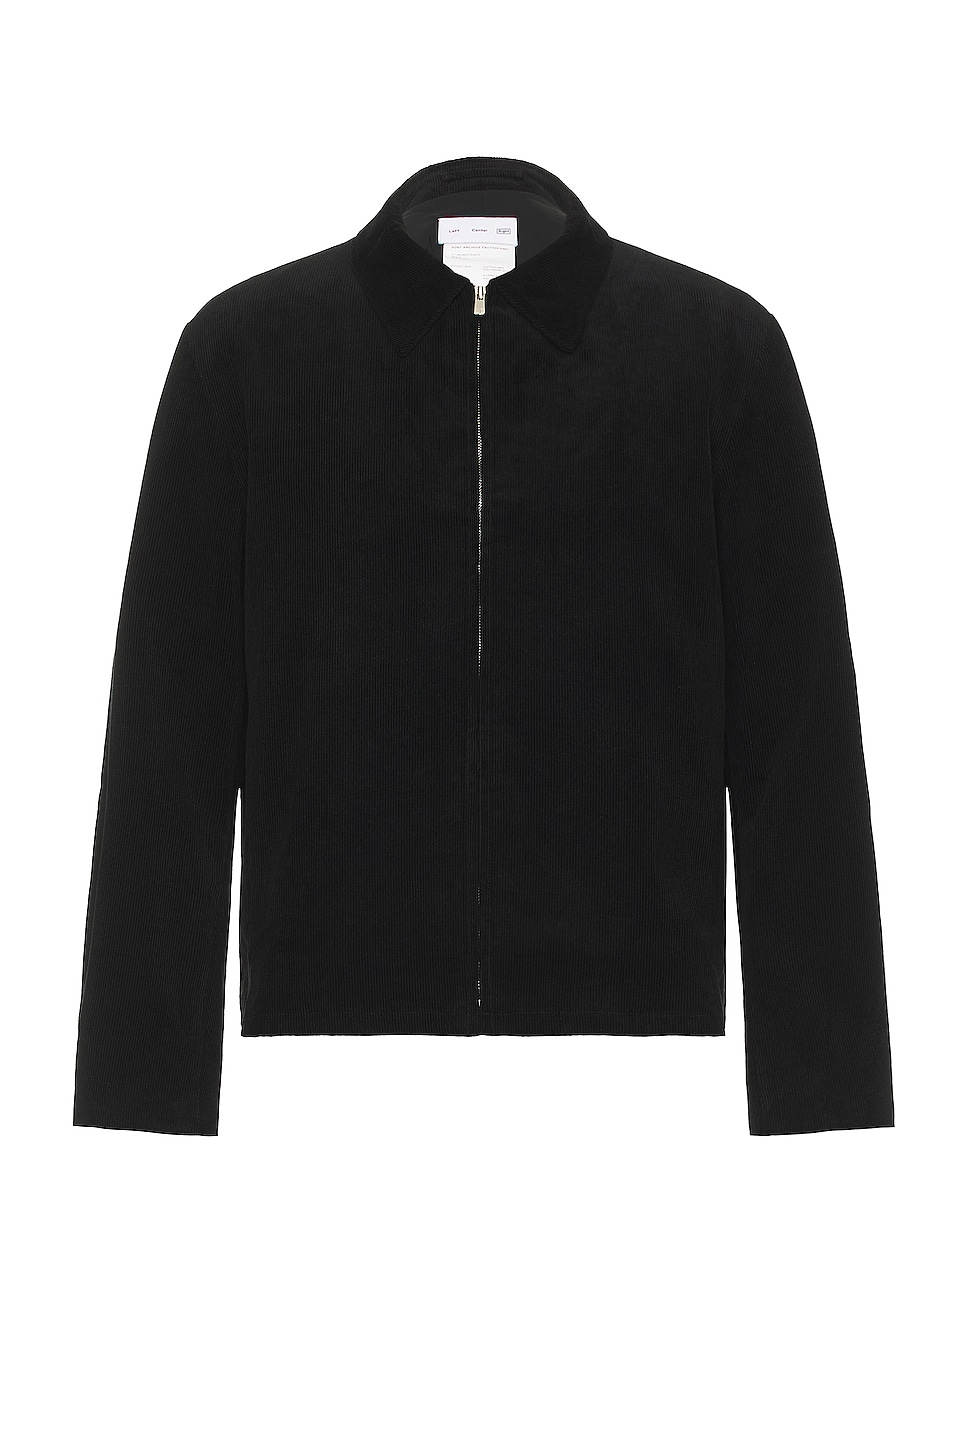 Image 1 of POST ARCHIVE FACTION (PAF) 5.1 Jacket Right in BLACK